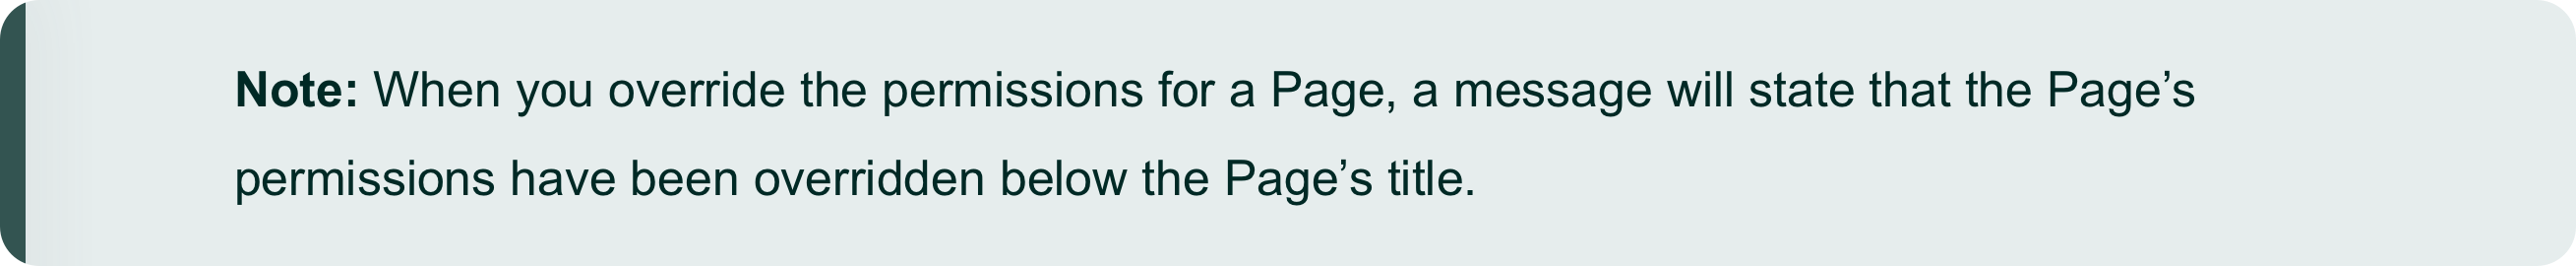 Manage_Page-Level_Permissions_1.png